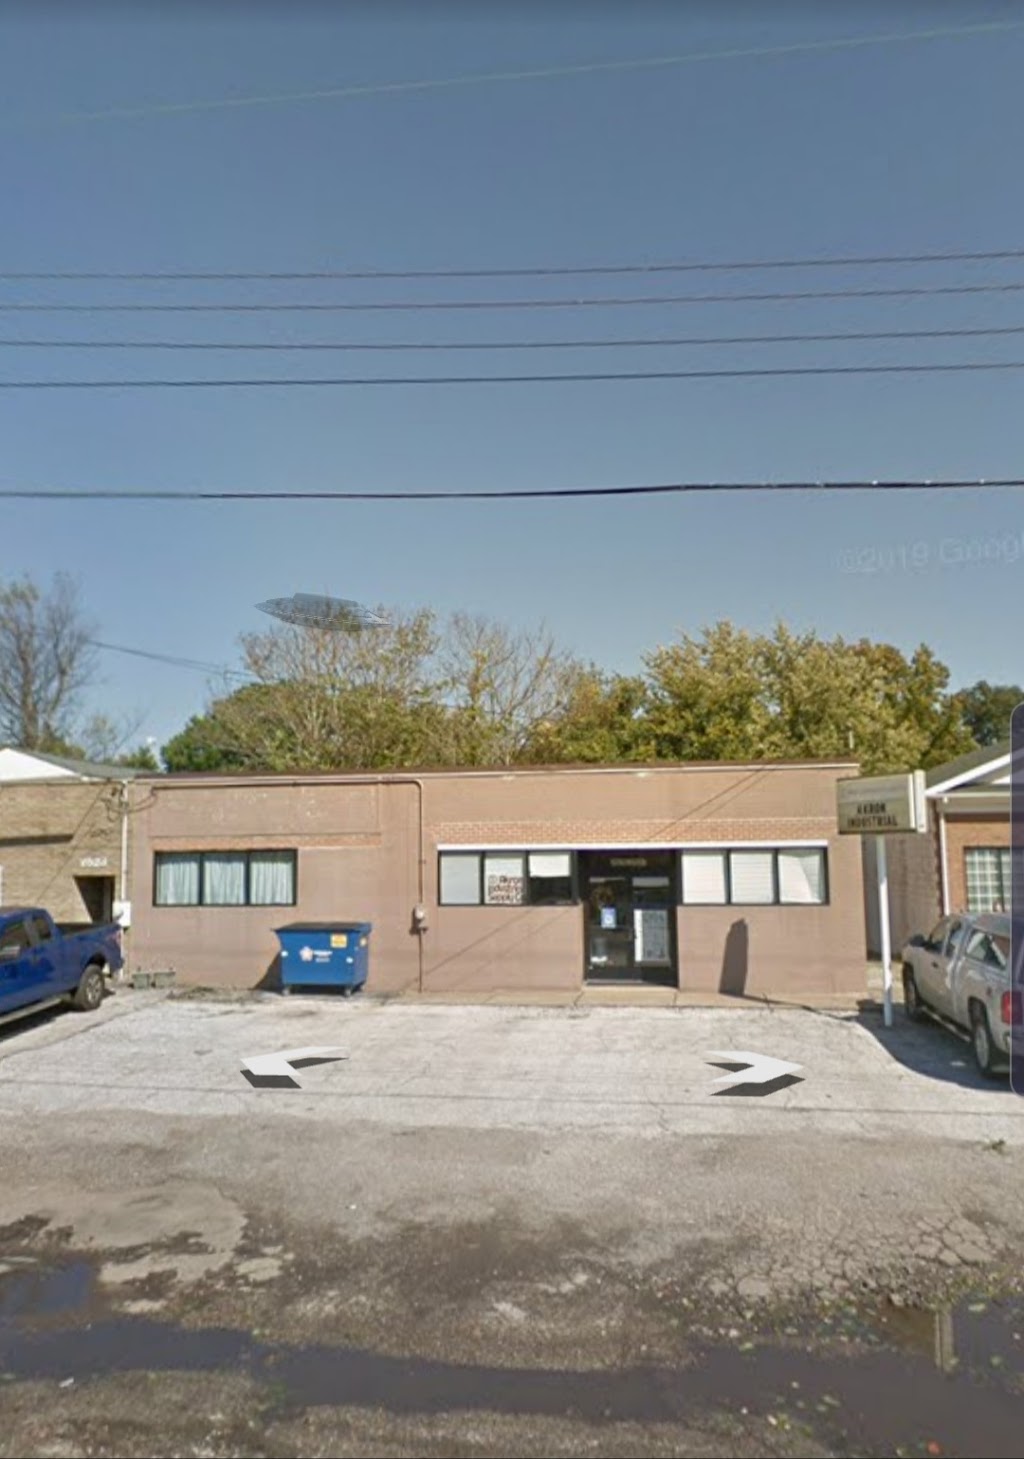 Akron Industrial Supply Co | 2527 Mogadore Rd, Akron, OH 44312, USA | Phone: (330) 798-8665